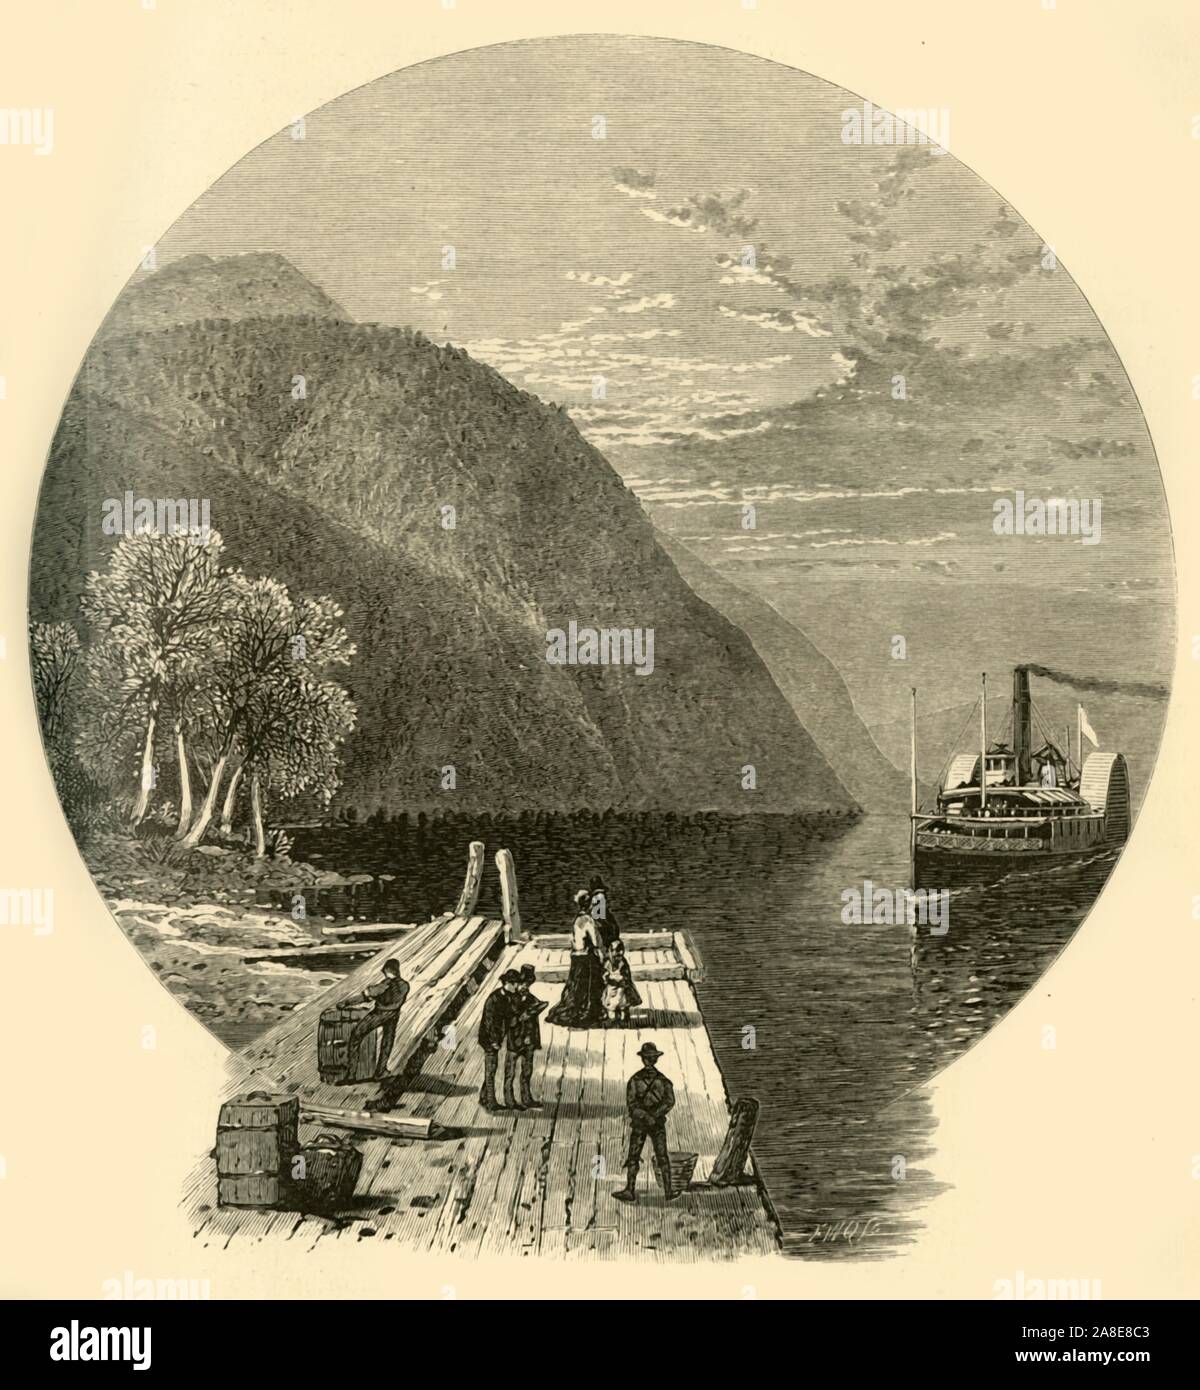 'Owl's Head Landing', 1874. Steamship arriving at a jetty on Lake Memphremagog, Quebec, Canada. '...the Owl's Head, a mountain surpassing others around the lake in form and size'. From &quot;Picturesque America; or, The Land We Live In, A Delineation by Pen and Pencil of the Mountains, Rivers, Lakes...with Illustrations on Steel and Wood by Eminent American Artists&quot; Vol. II, edited by William Cullen Bryant. [D. Appleton and Company, New York, 1874] Stock Photo